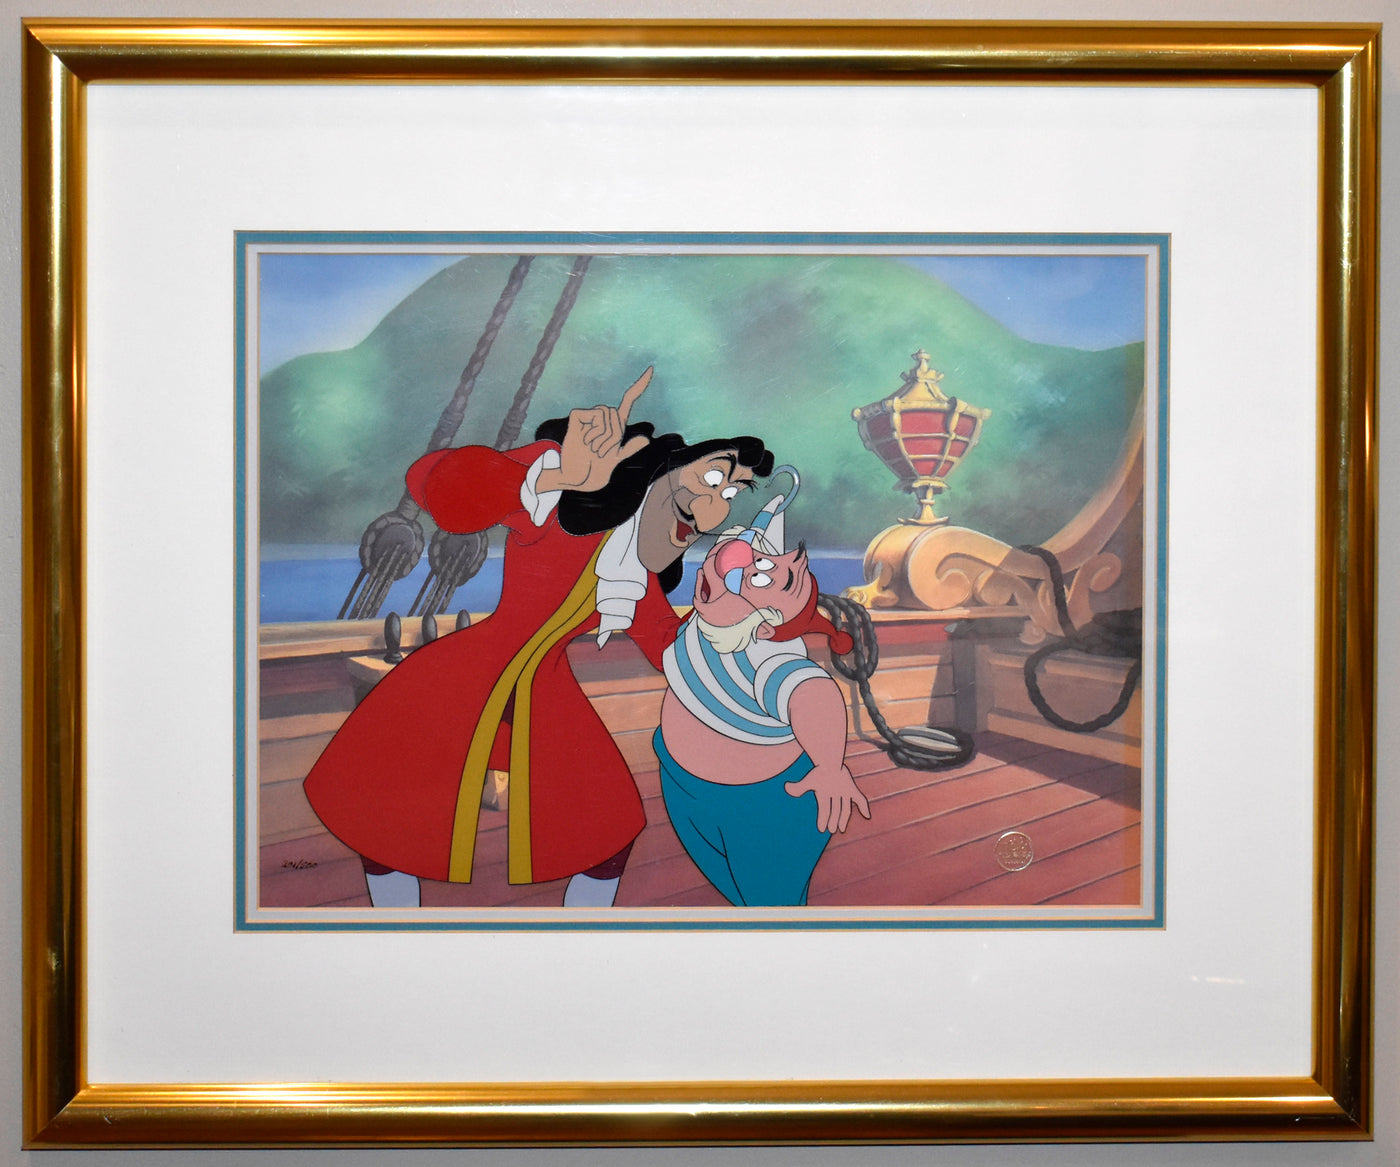 Disney Animation Art Limited Edition Cel Featuring Hook and Smee from "Disney Villains Volume I," Signed by Ollie Johnston and Frank Thomas